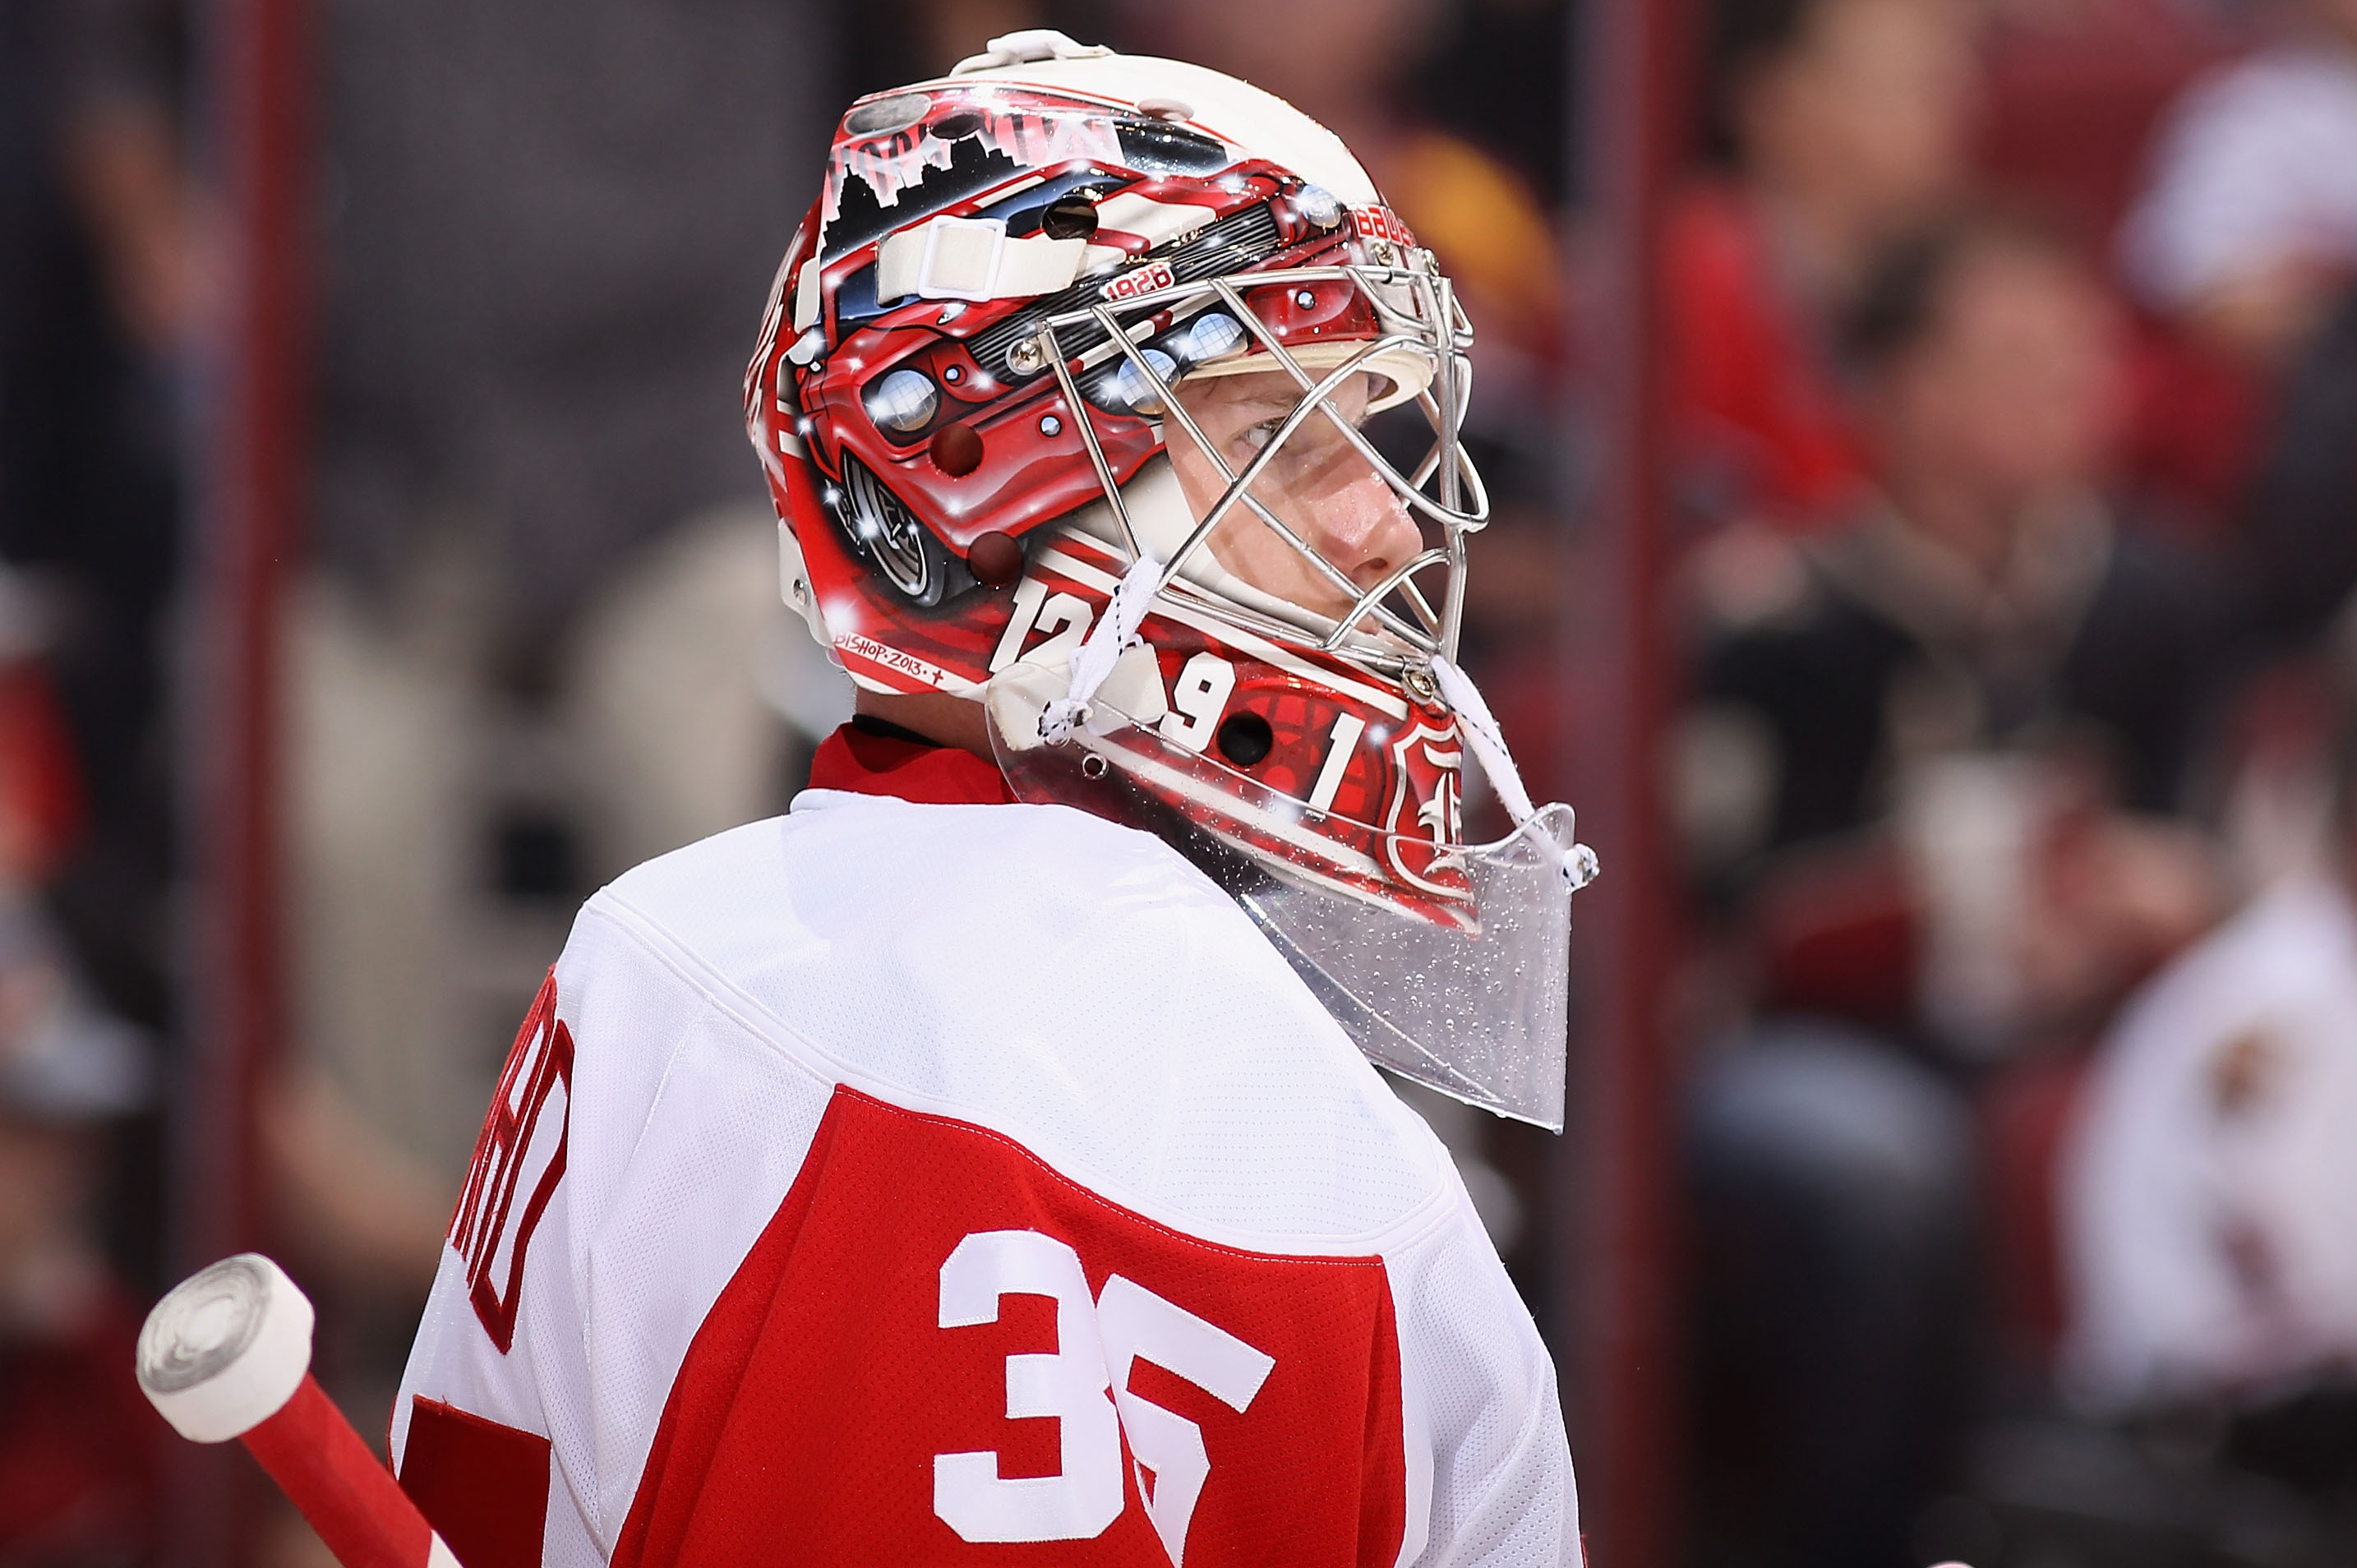 Detroit Red Wings' Jimmy Howard buys N95 masks for local hospital